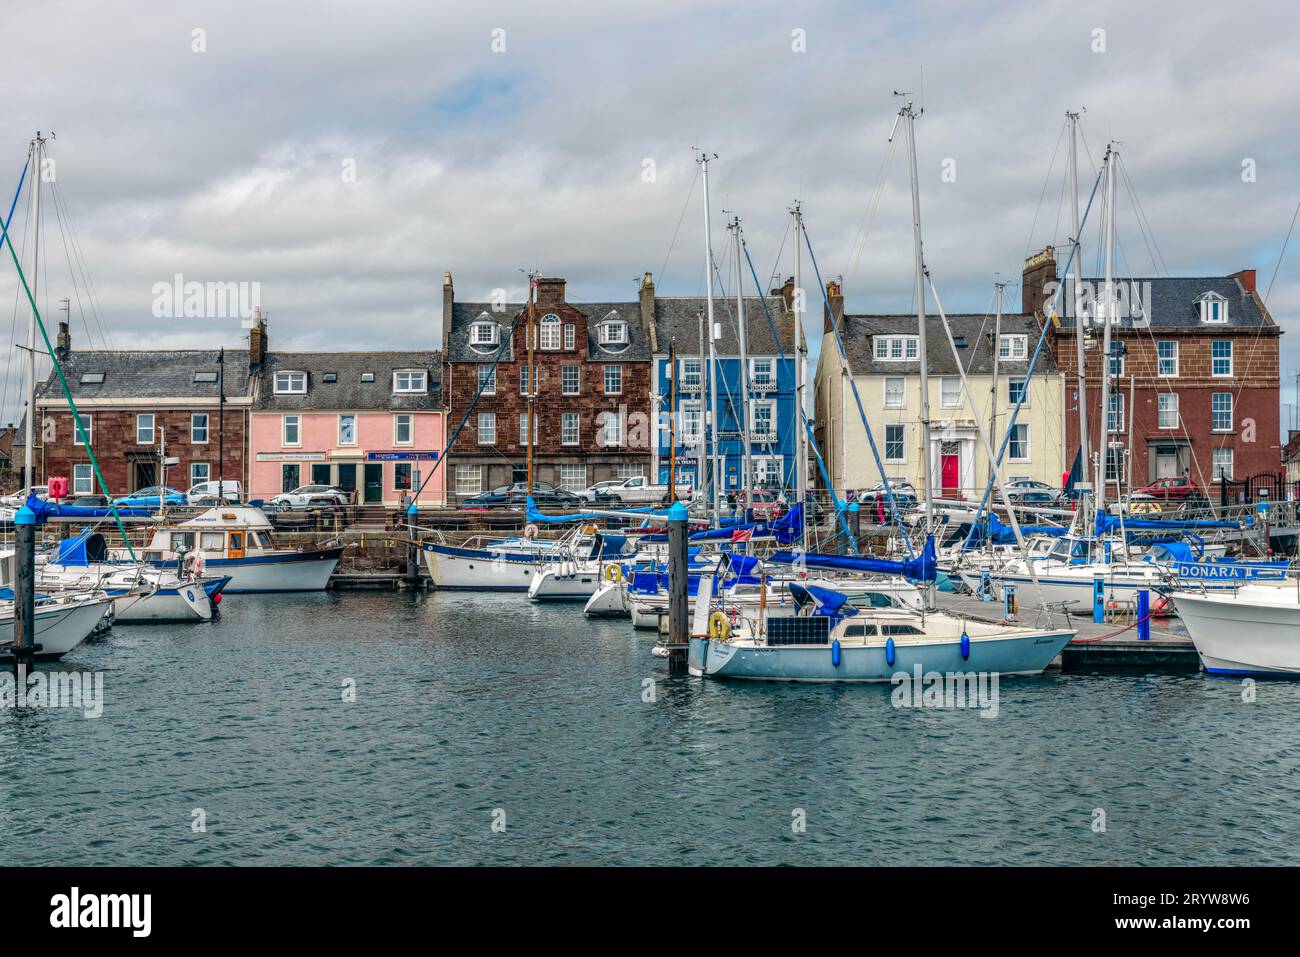 The fishing town of Arbroath in Angus, Scotland Stock Photo